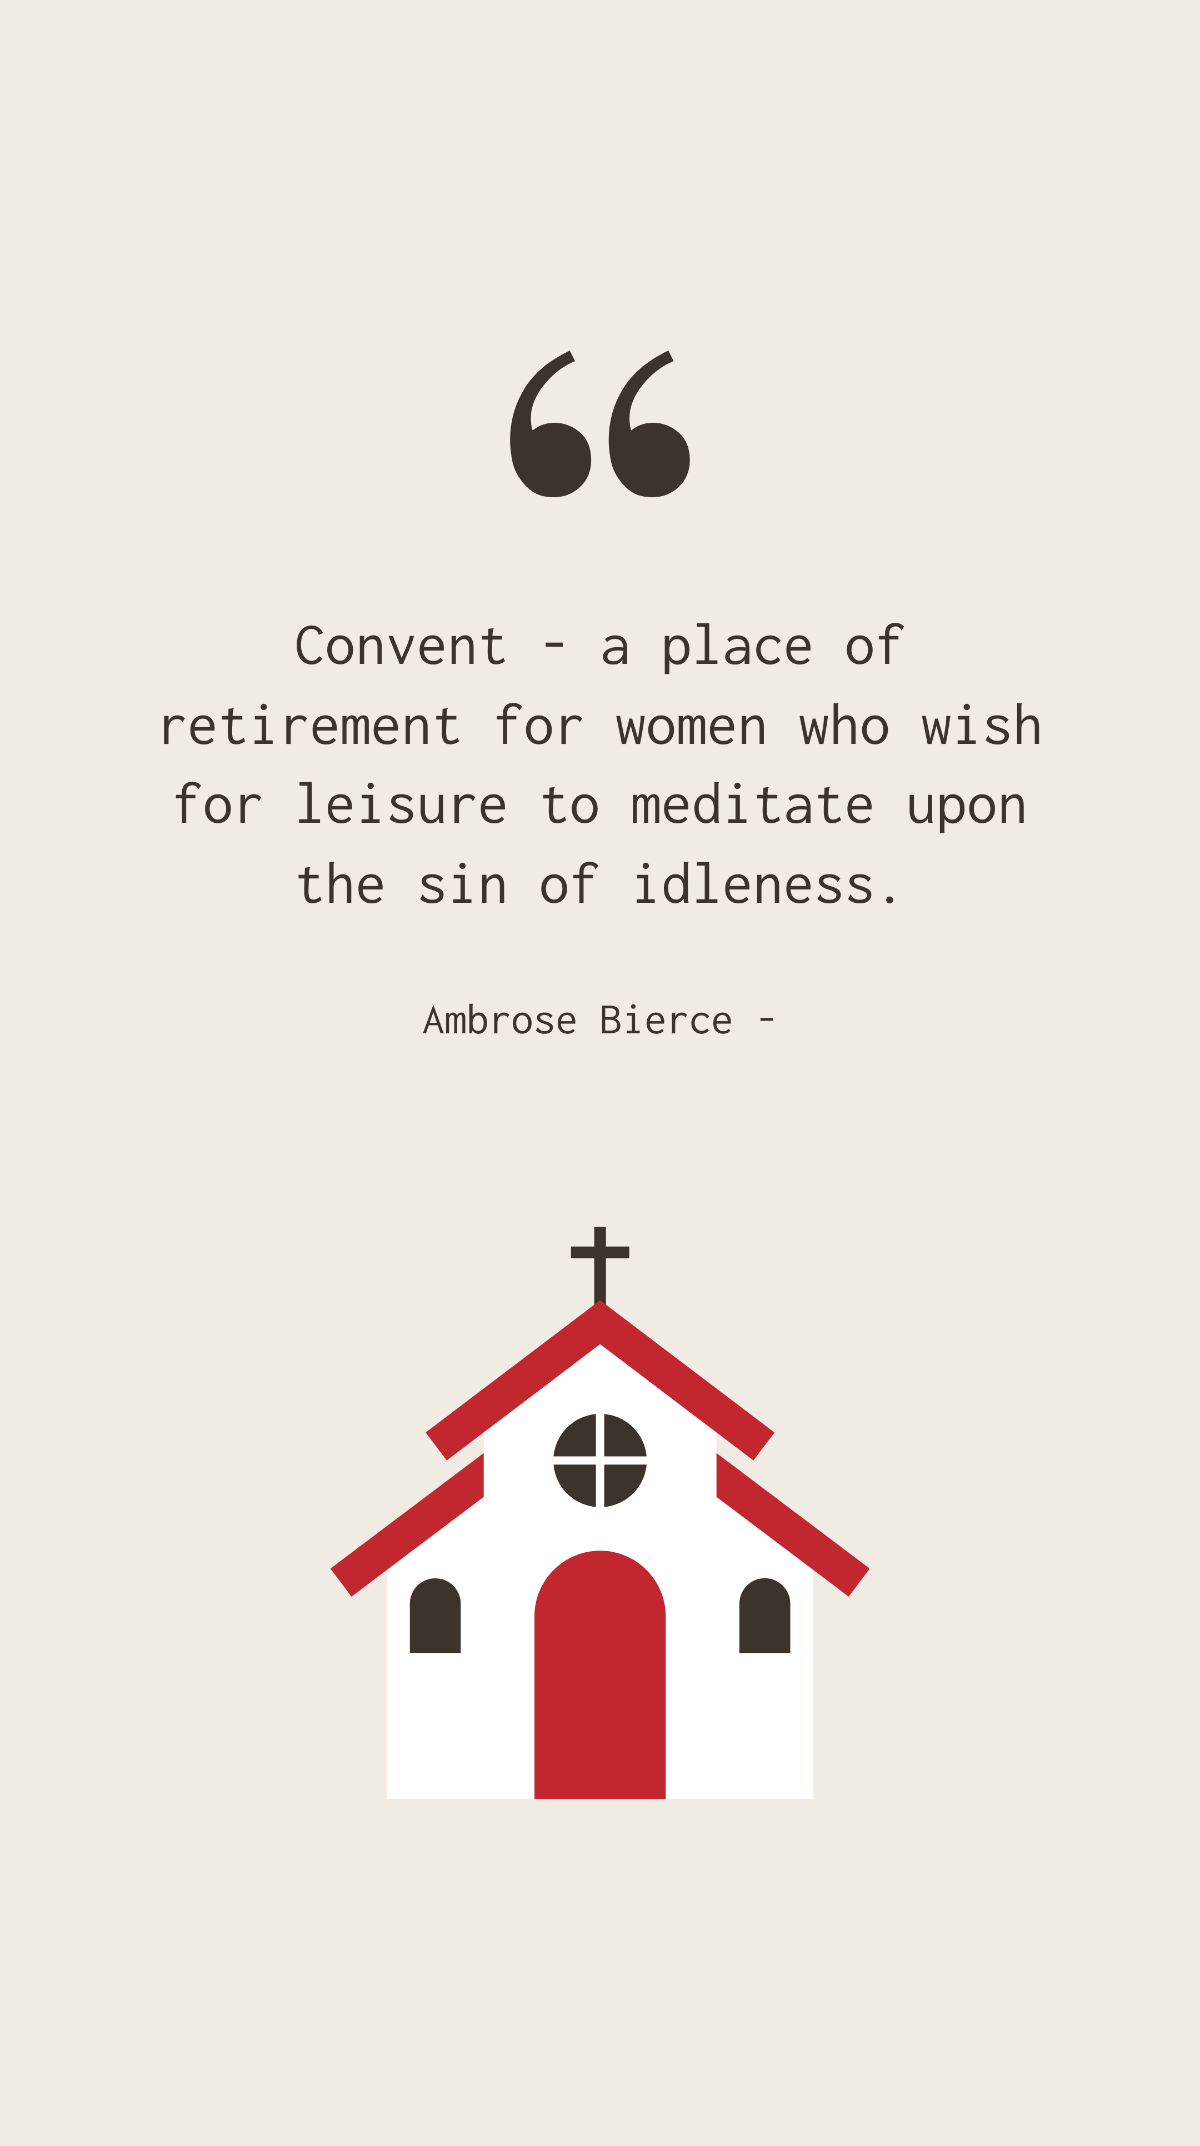 Ambrose Bierce - Convent - a place of retirement for women who wish for leisure to meditate upon the sin of idleness.